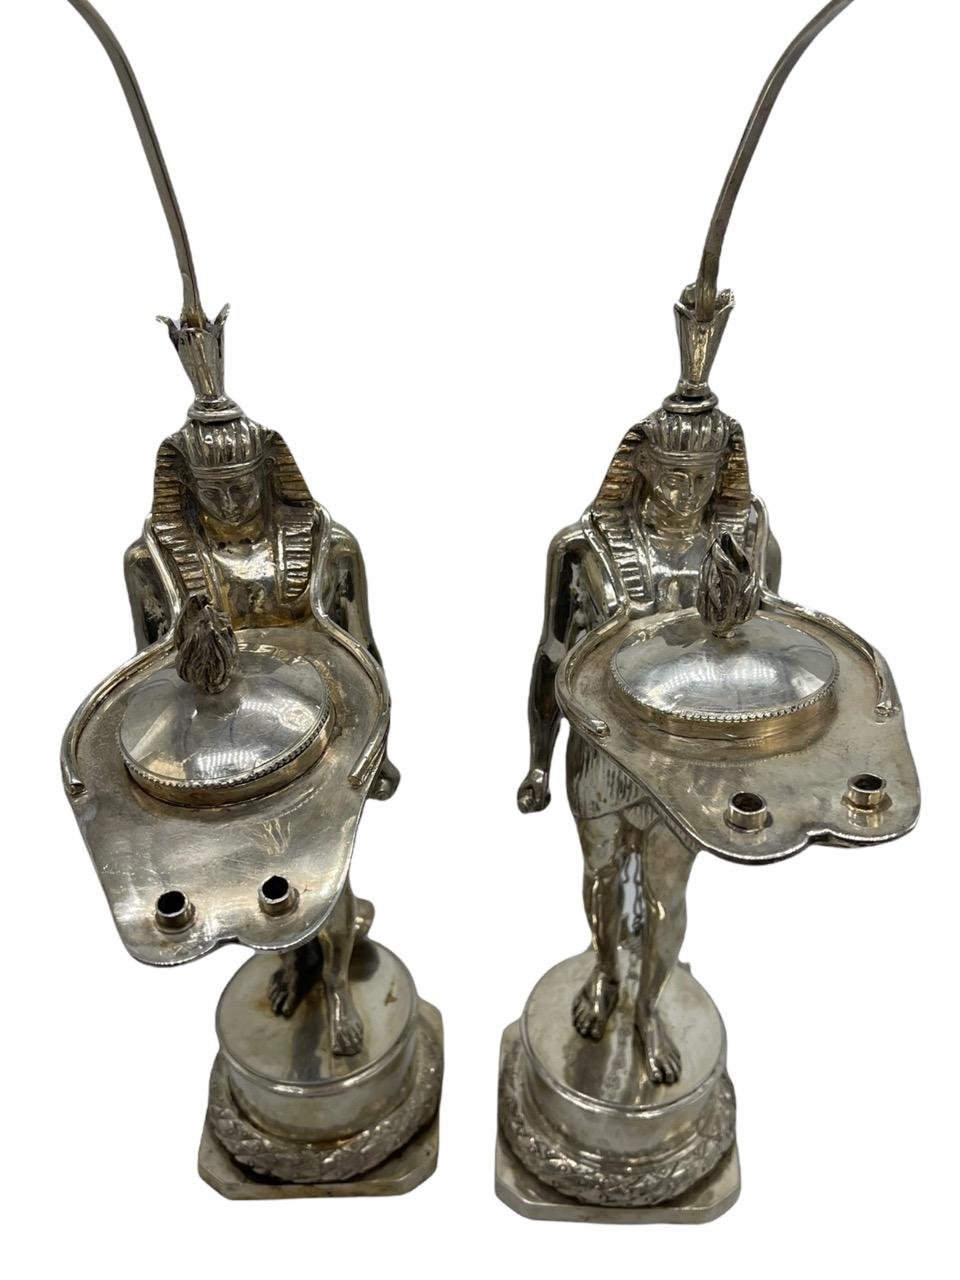 Pair of Early 19th Century Italian Antique Silver Oil Lamps by Vincenzo Belli II For Sale 5